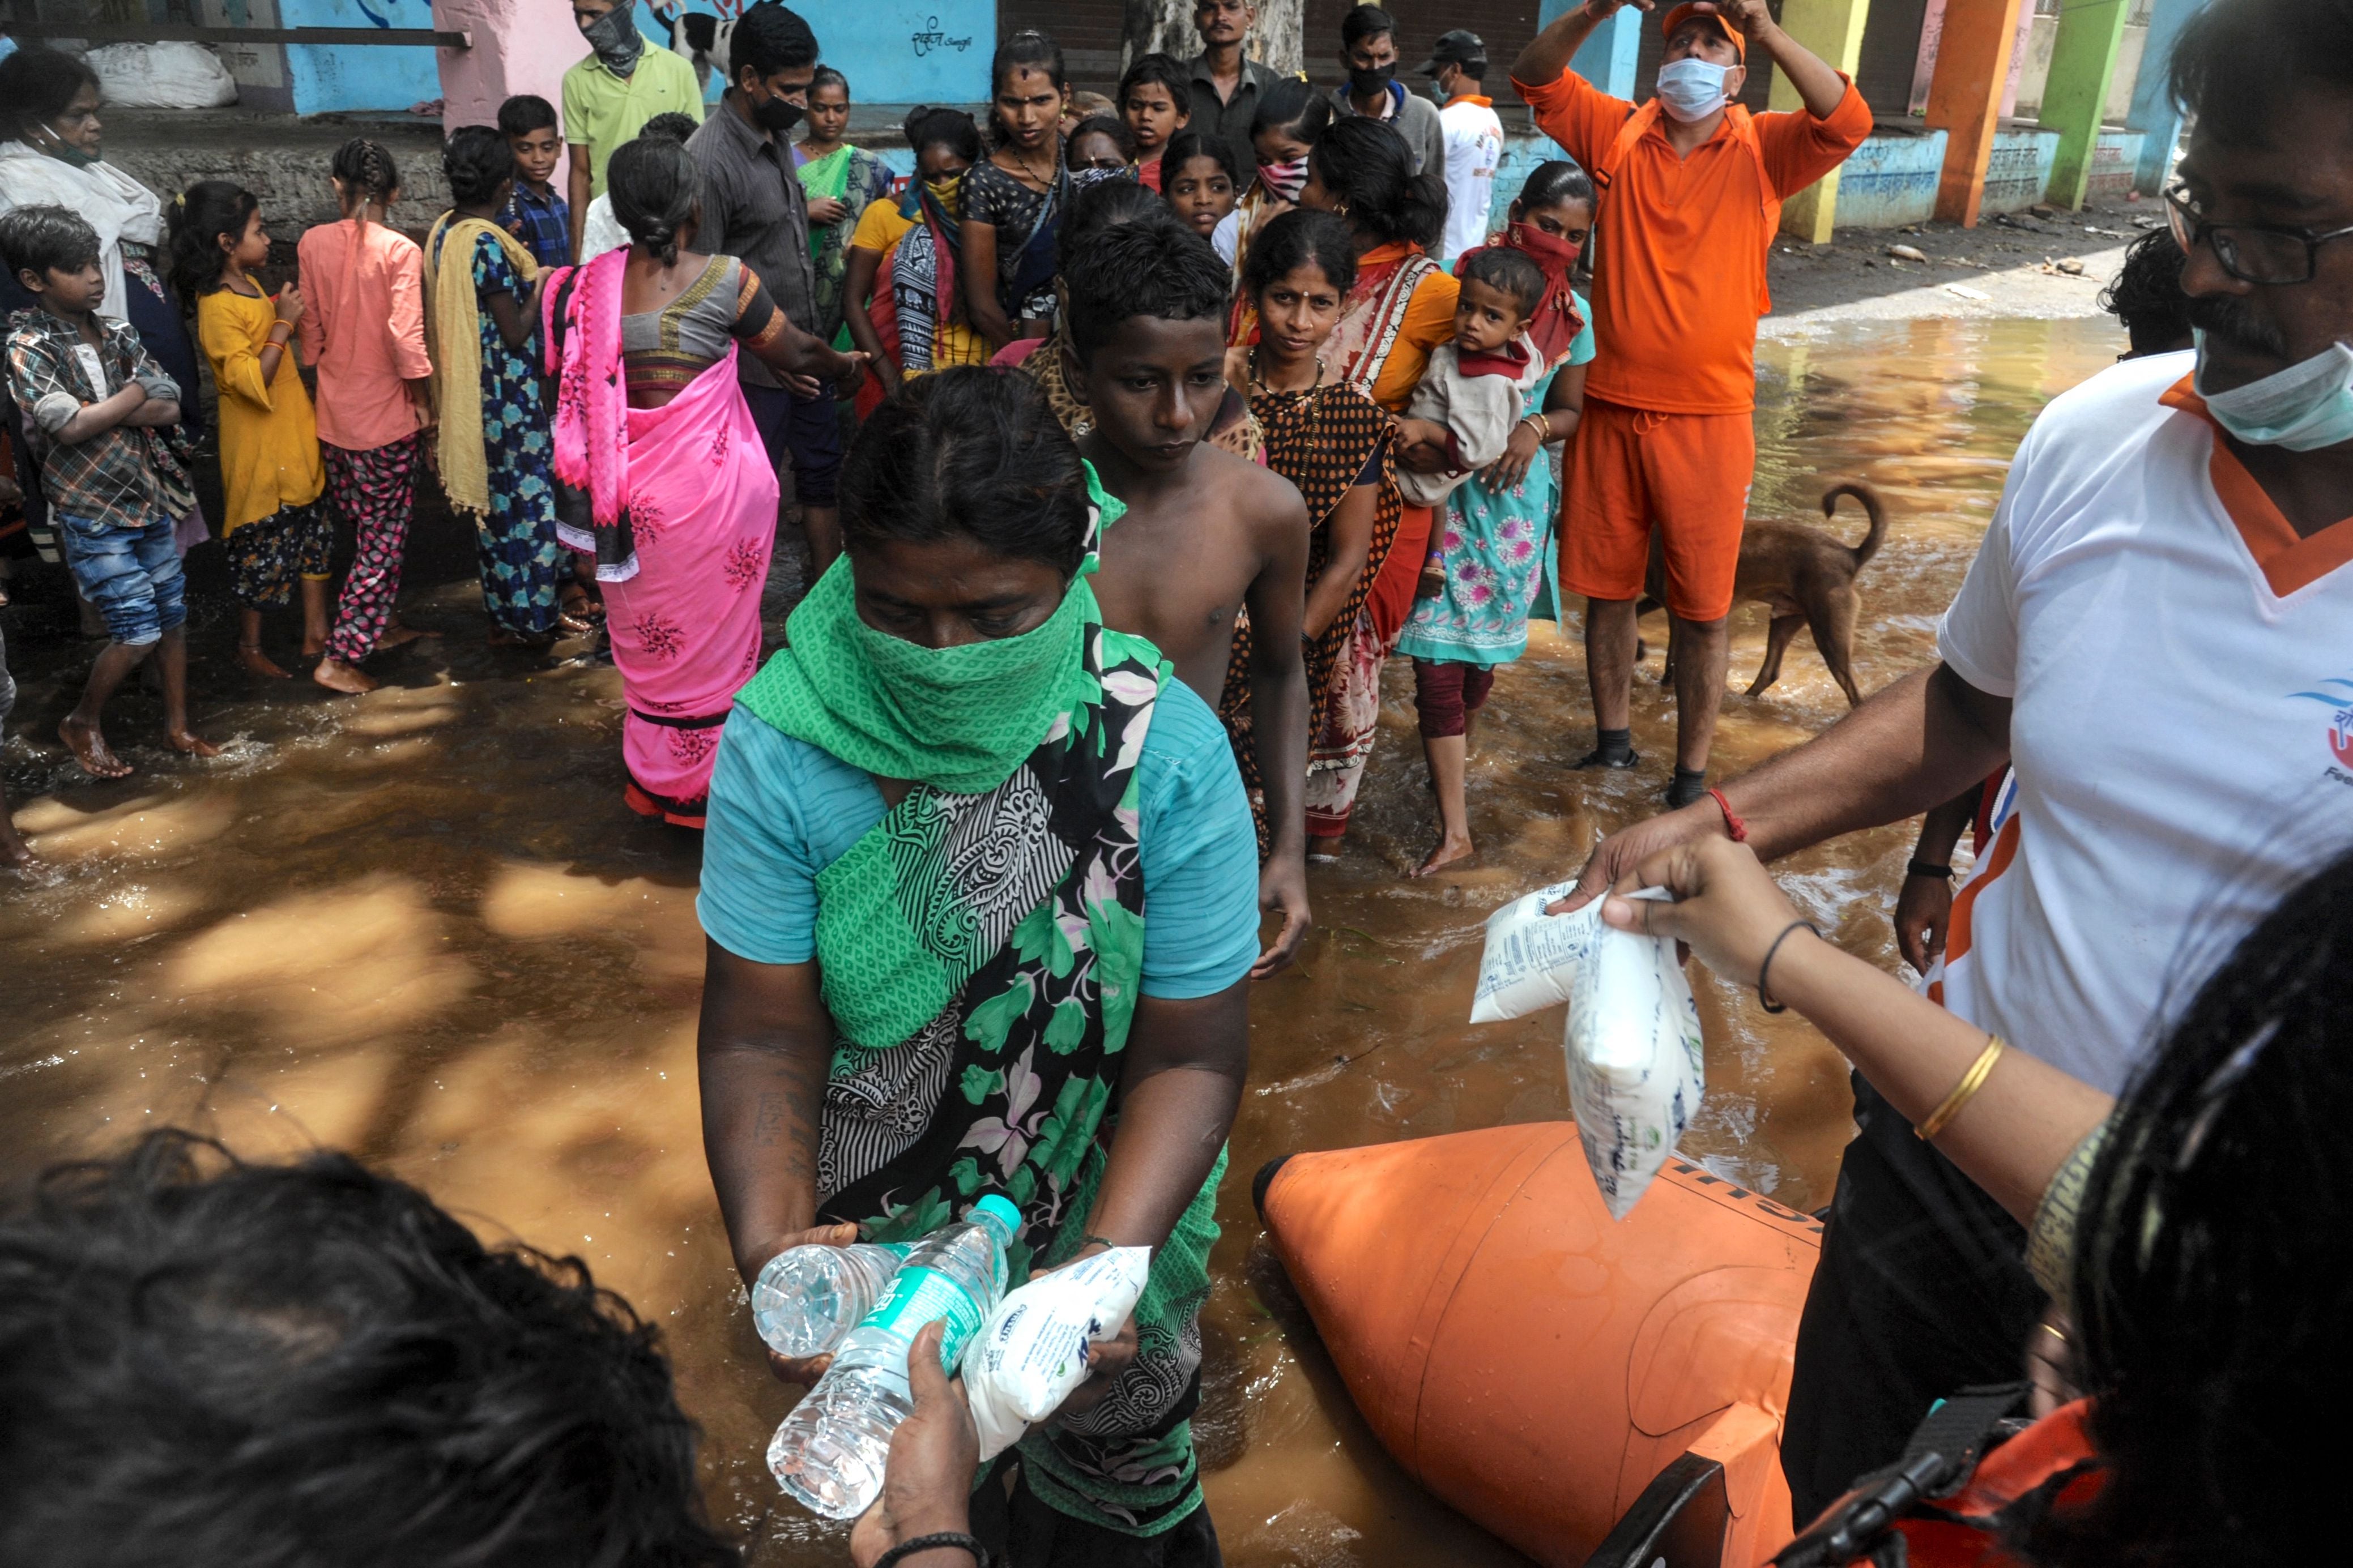 India's National Disaster Response Force (NDRF) personnel distribute food and relief material to people impacted by floods in Maharashtra